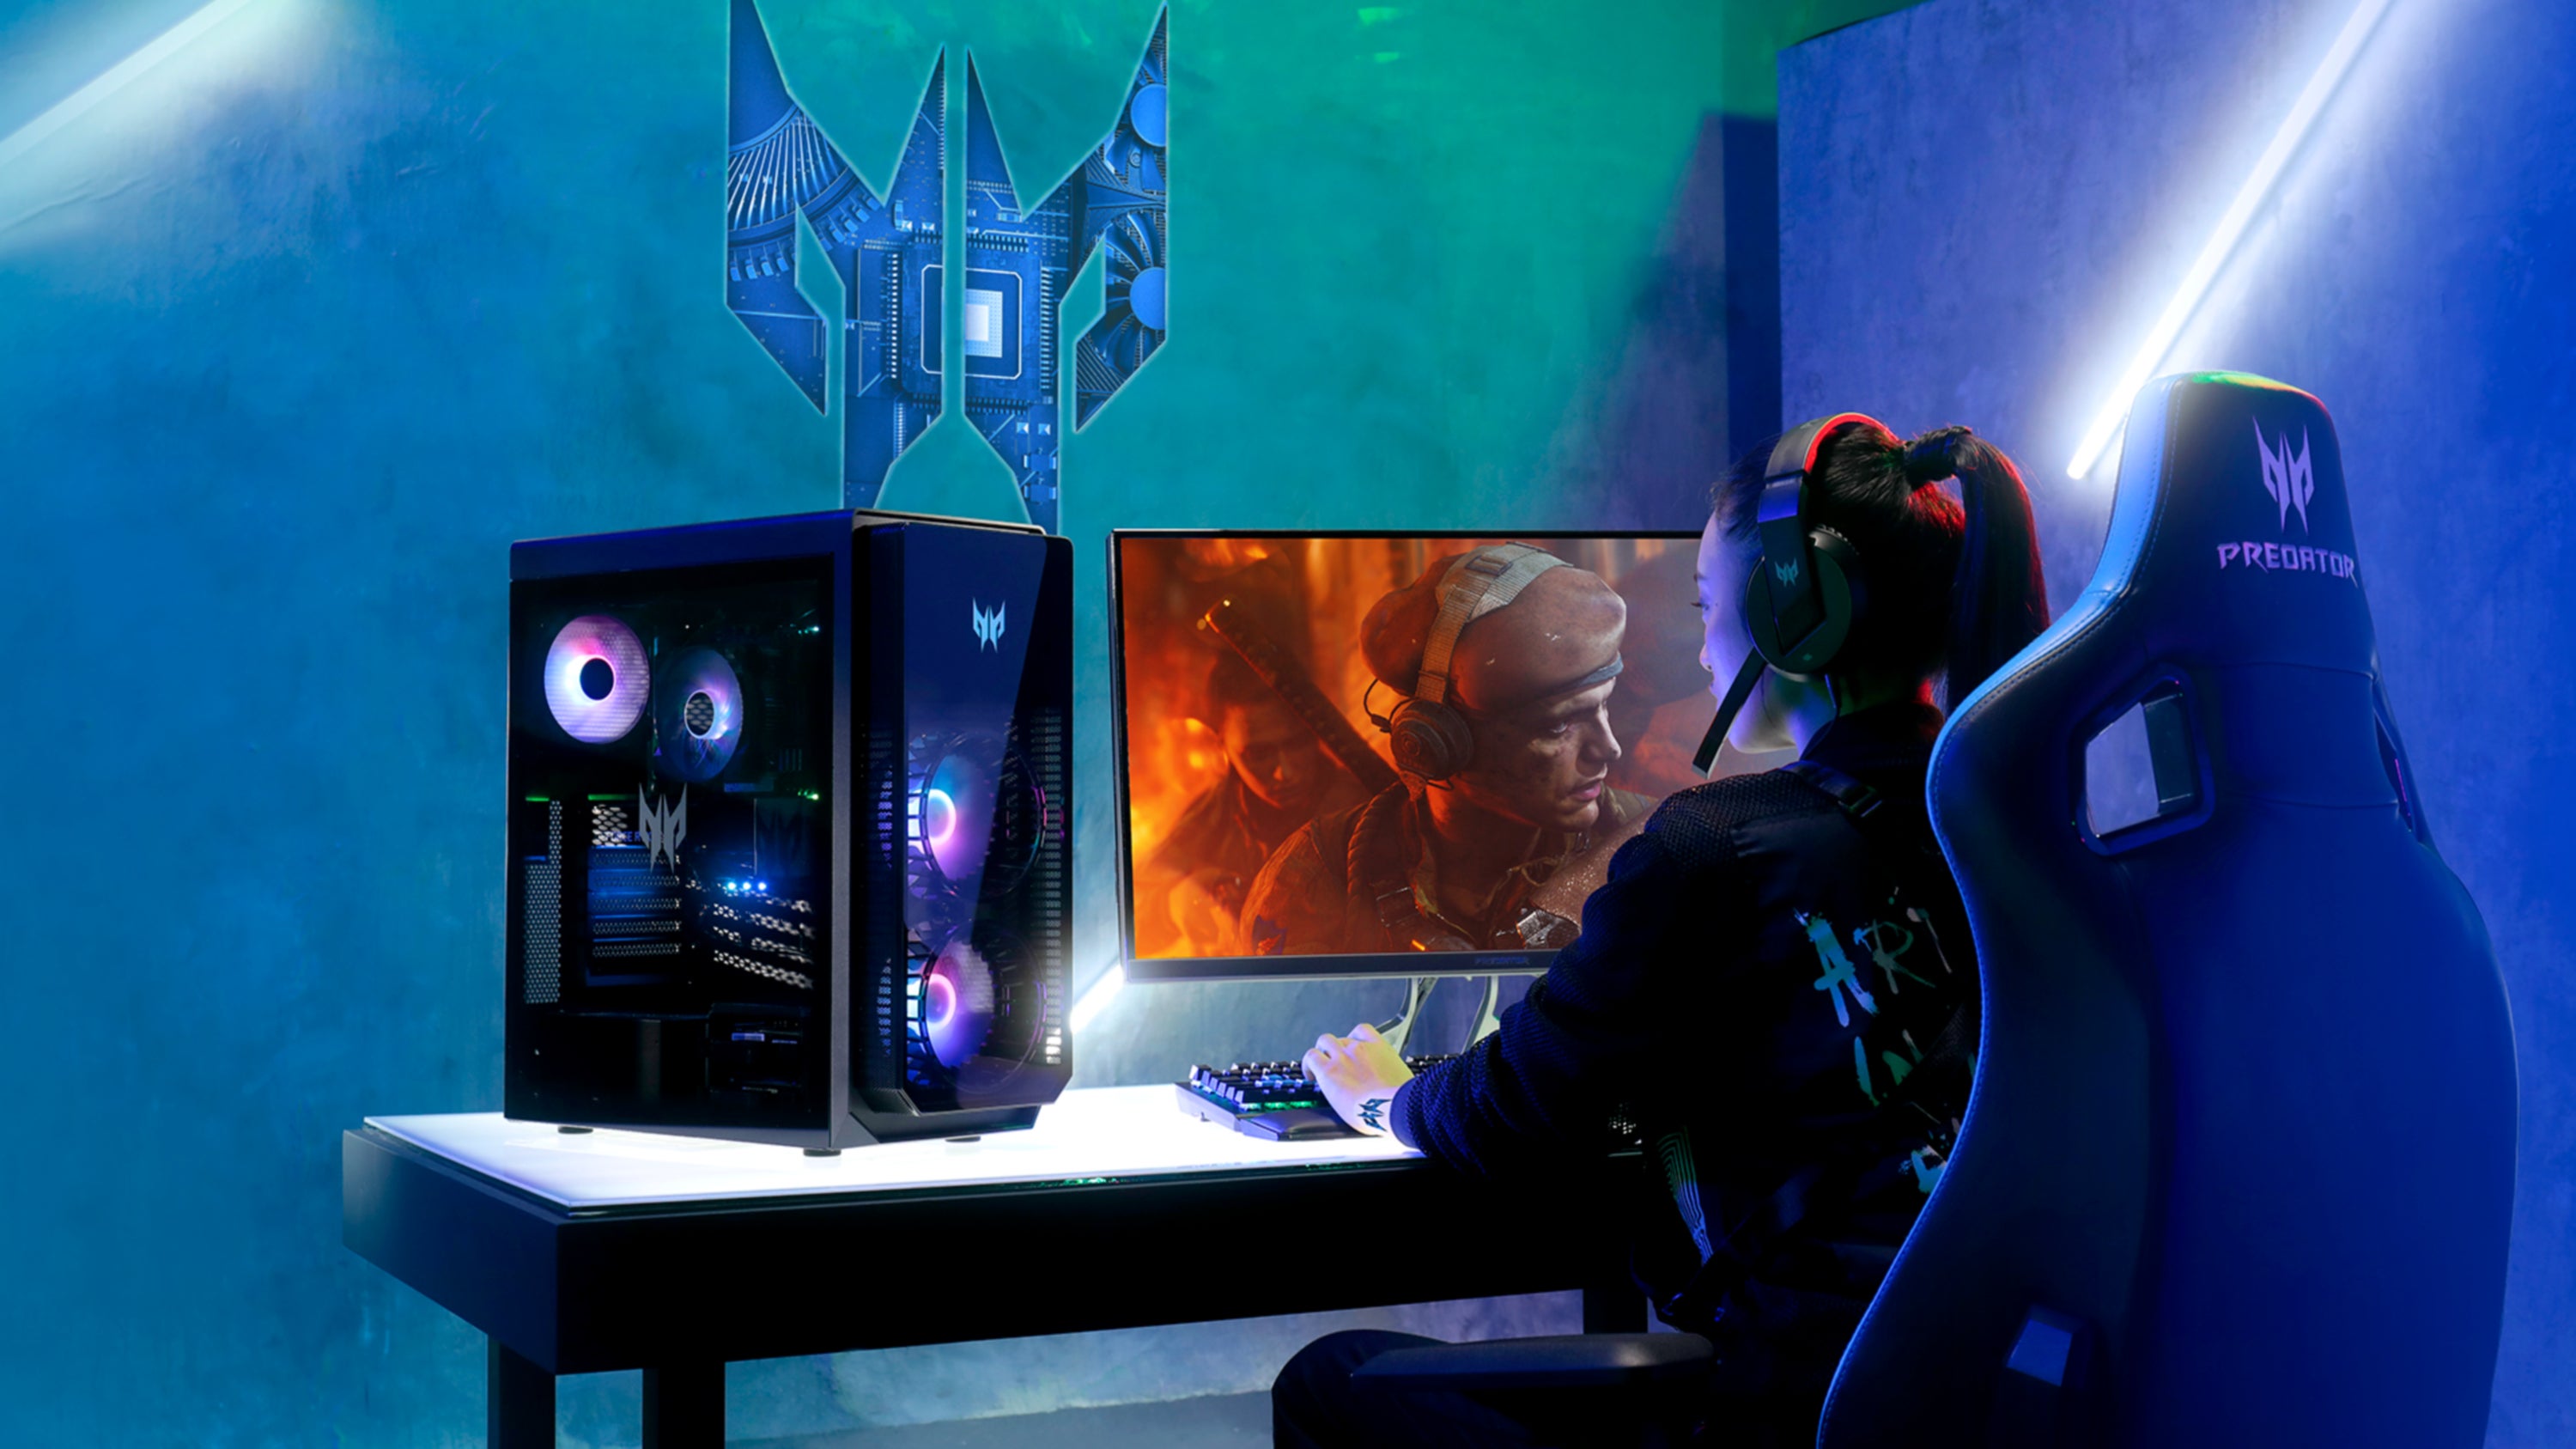 The Acer Predator Orion 5000 sits on a desk, next to a woman playing games on it.